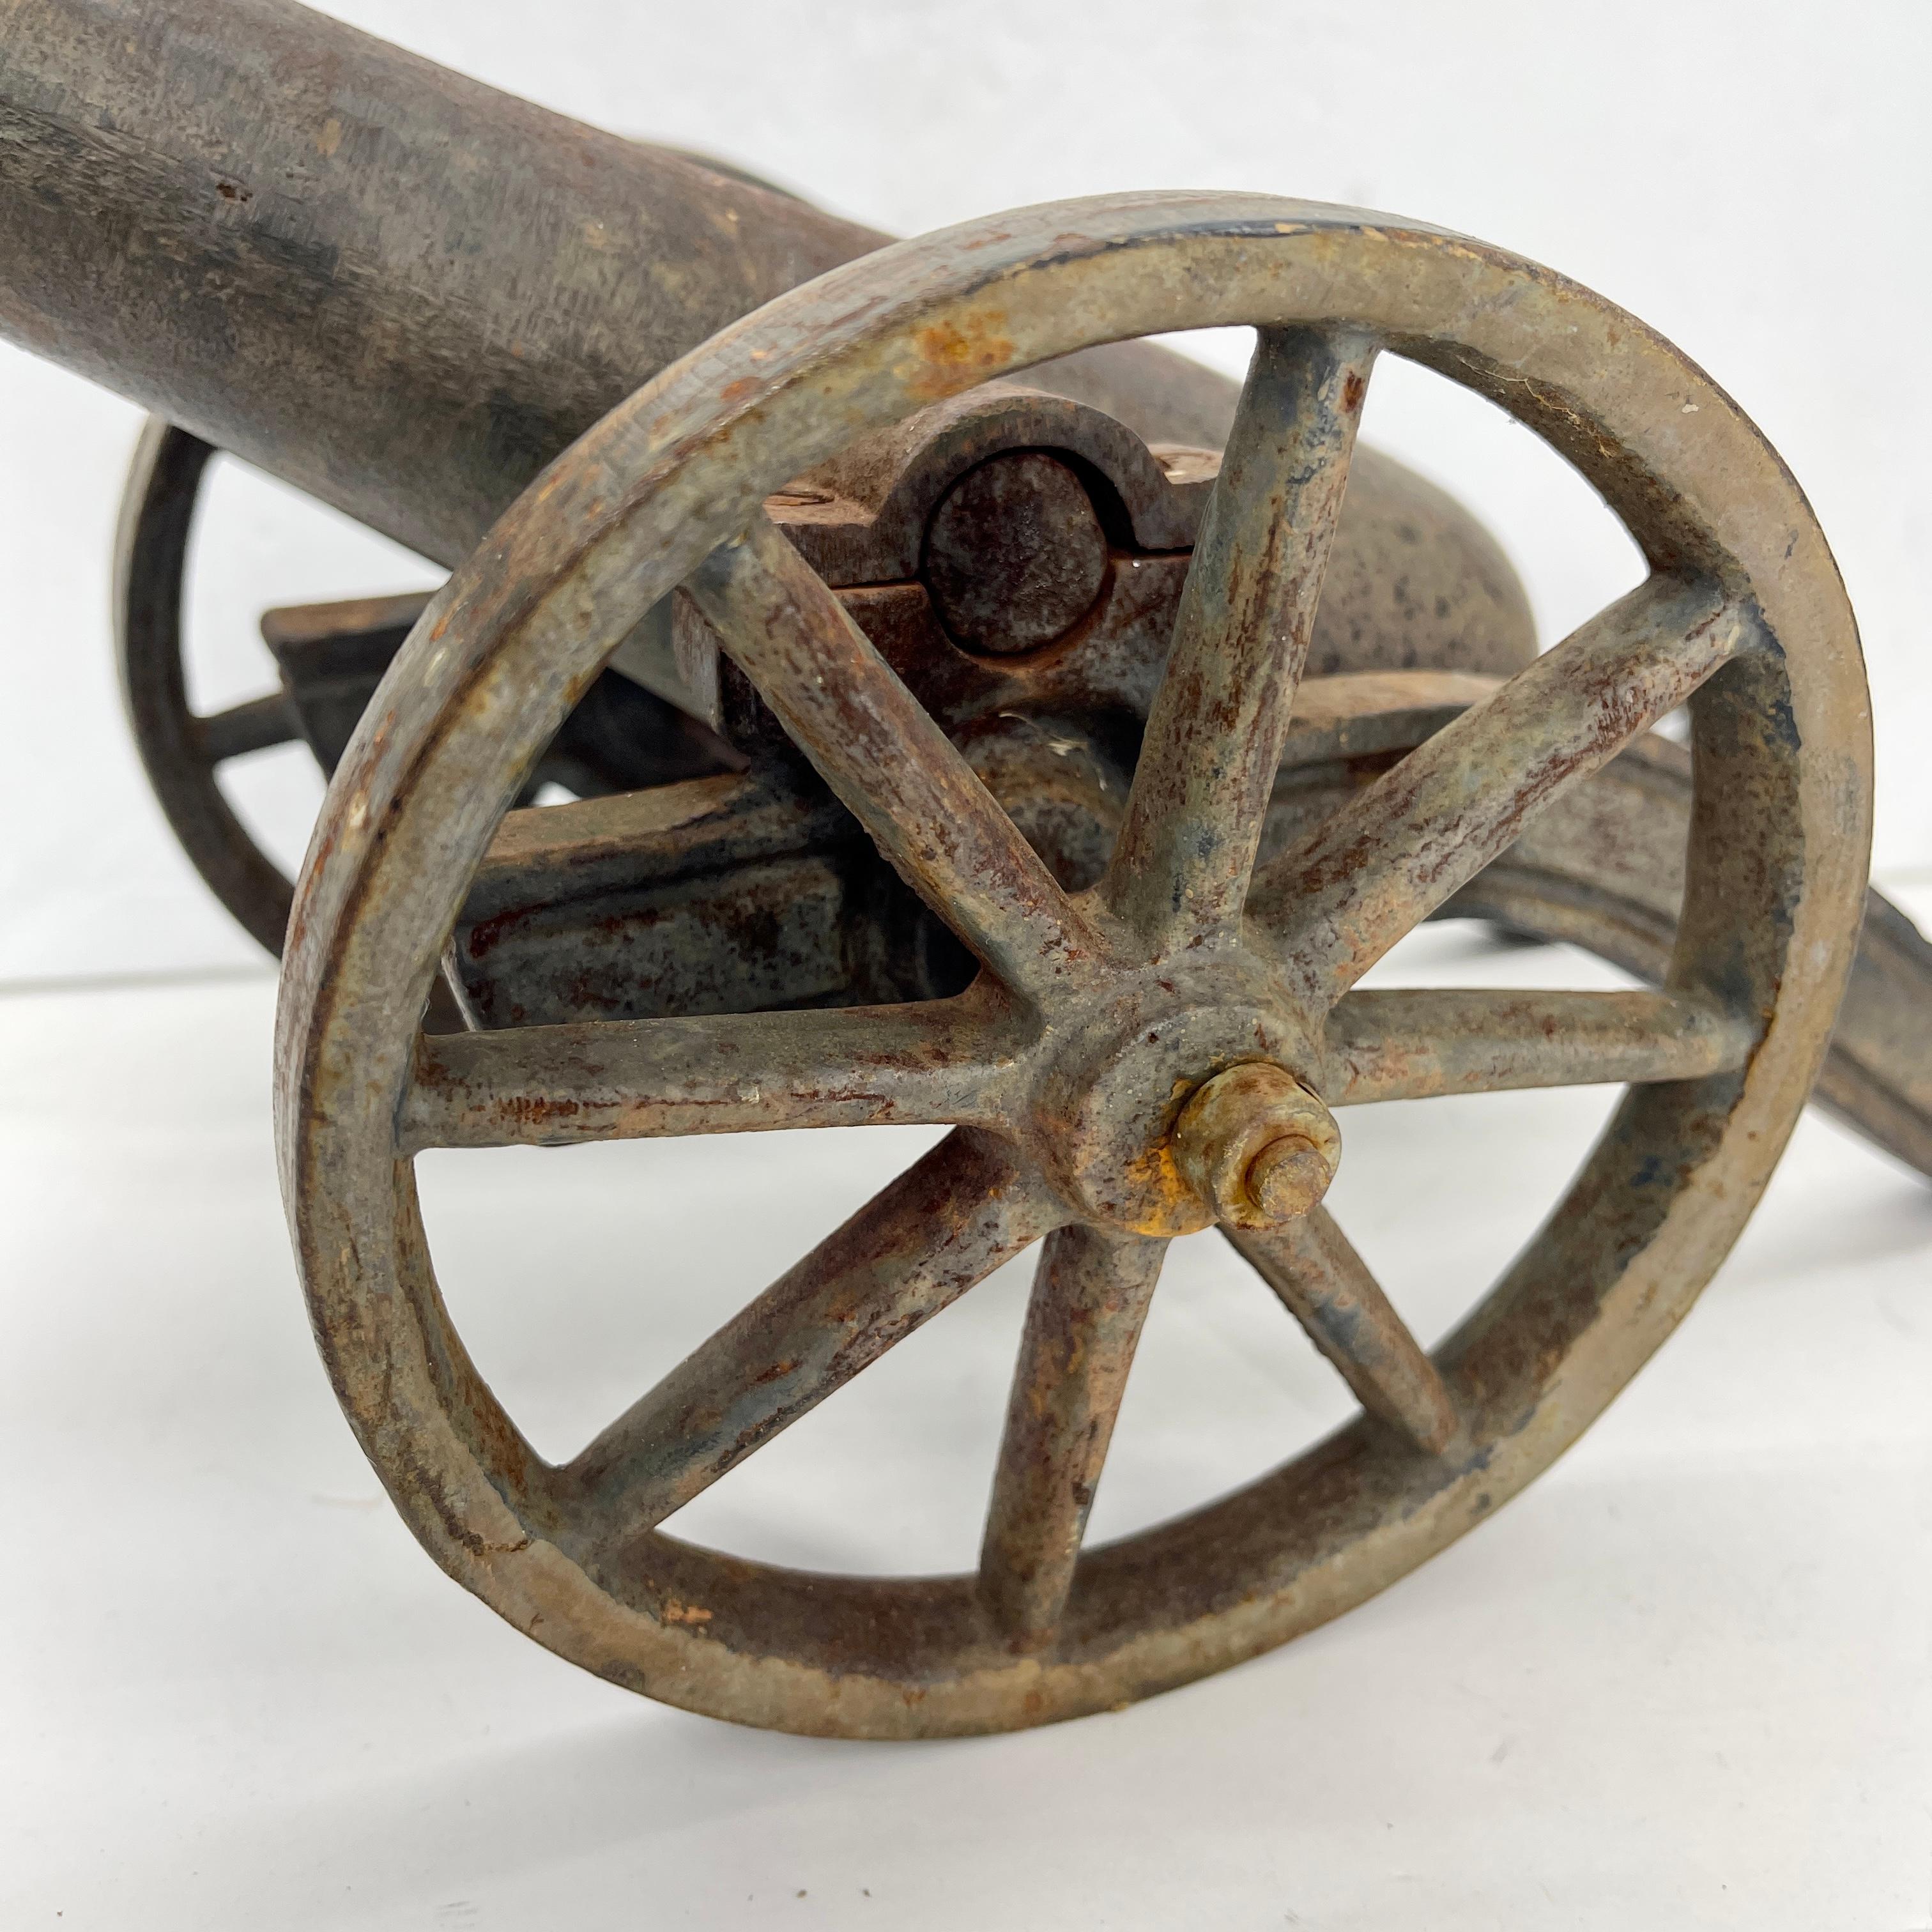 Small Early 20th Century Iron Cannon Desk Accessory with Eagle-Head Decoration For Sale 5